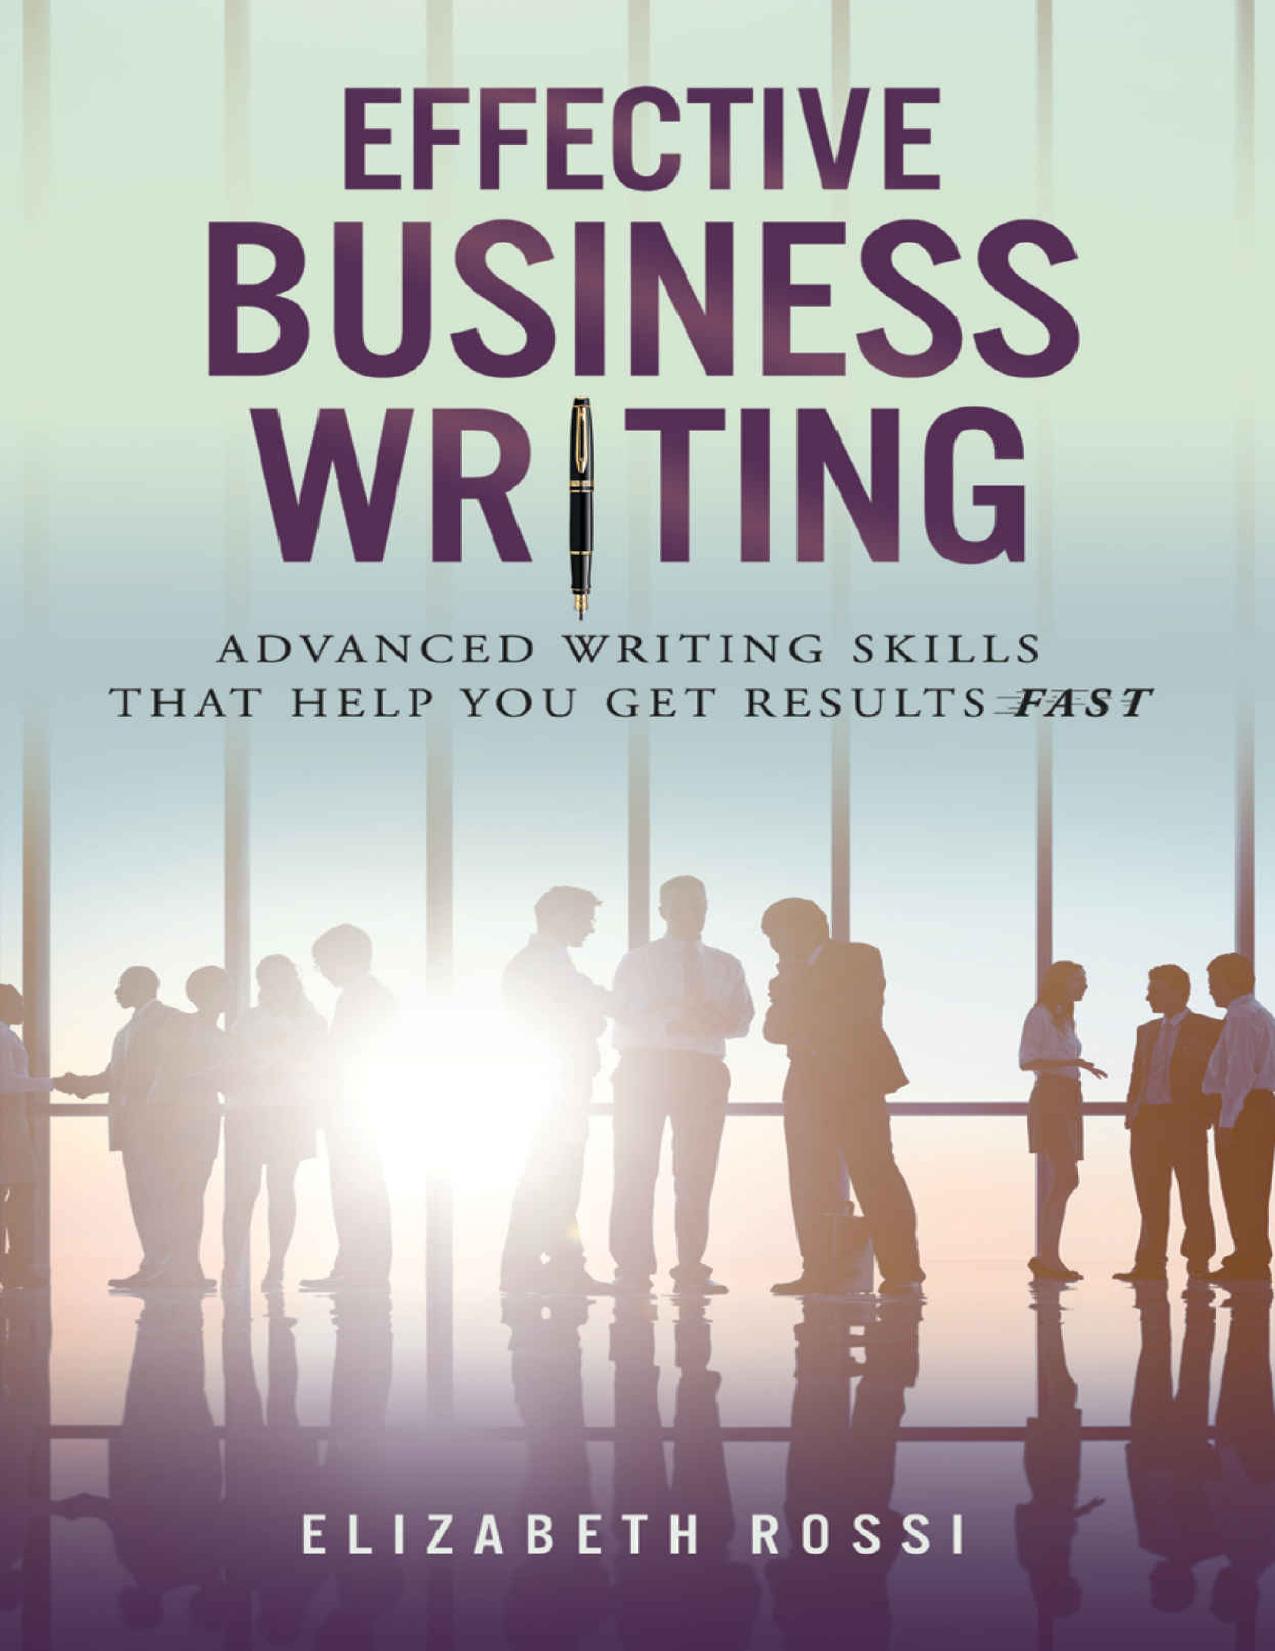 (eBook PDF)Effective Business Writing: Advanced writing skills that help you achieve results faster by Elizabeth Rossi